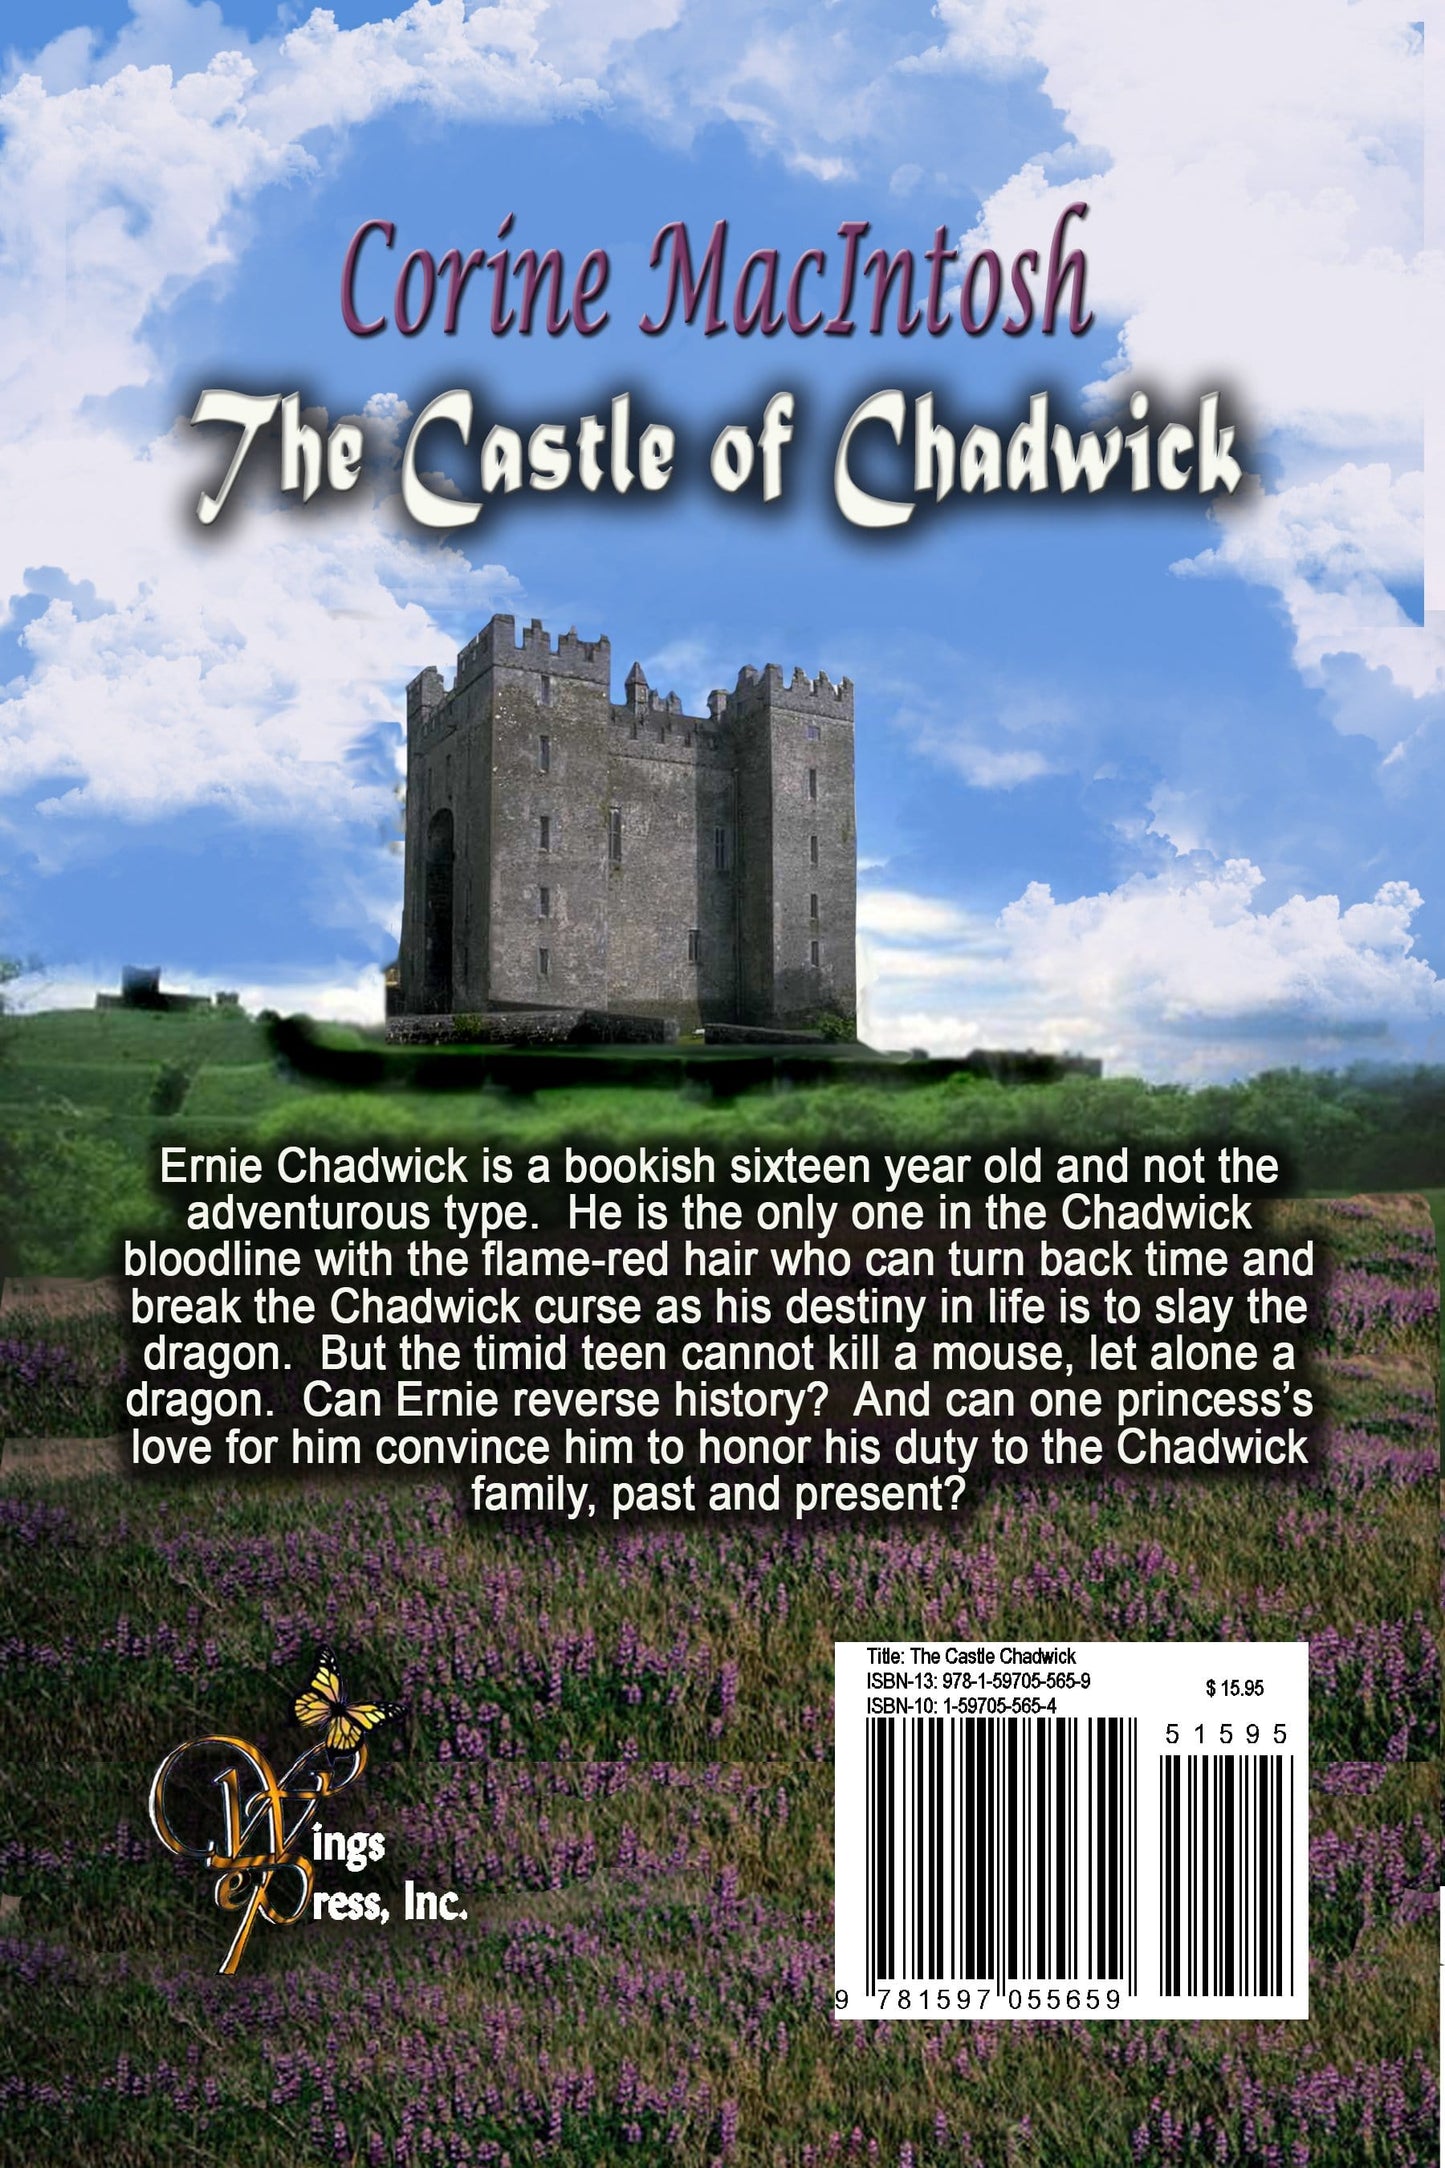 The Castle of Chadwick